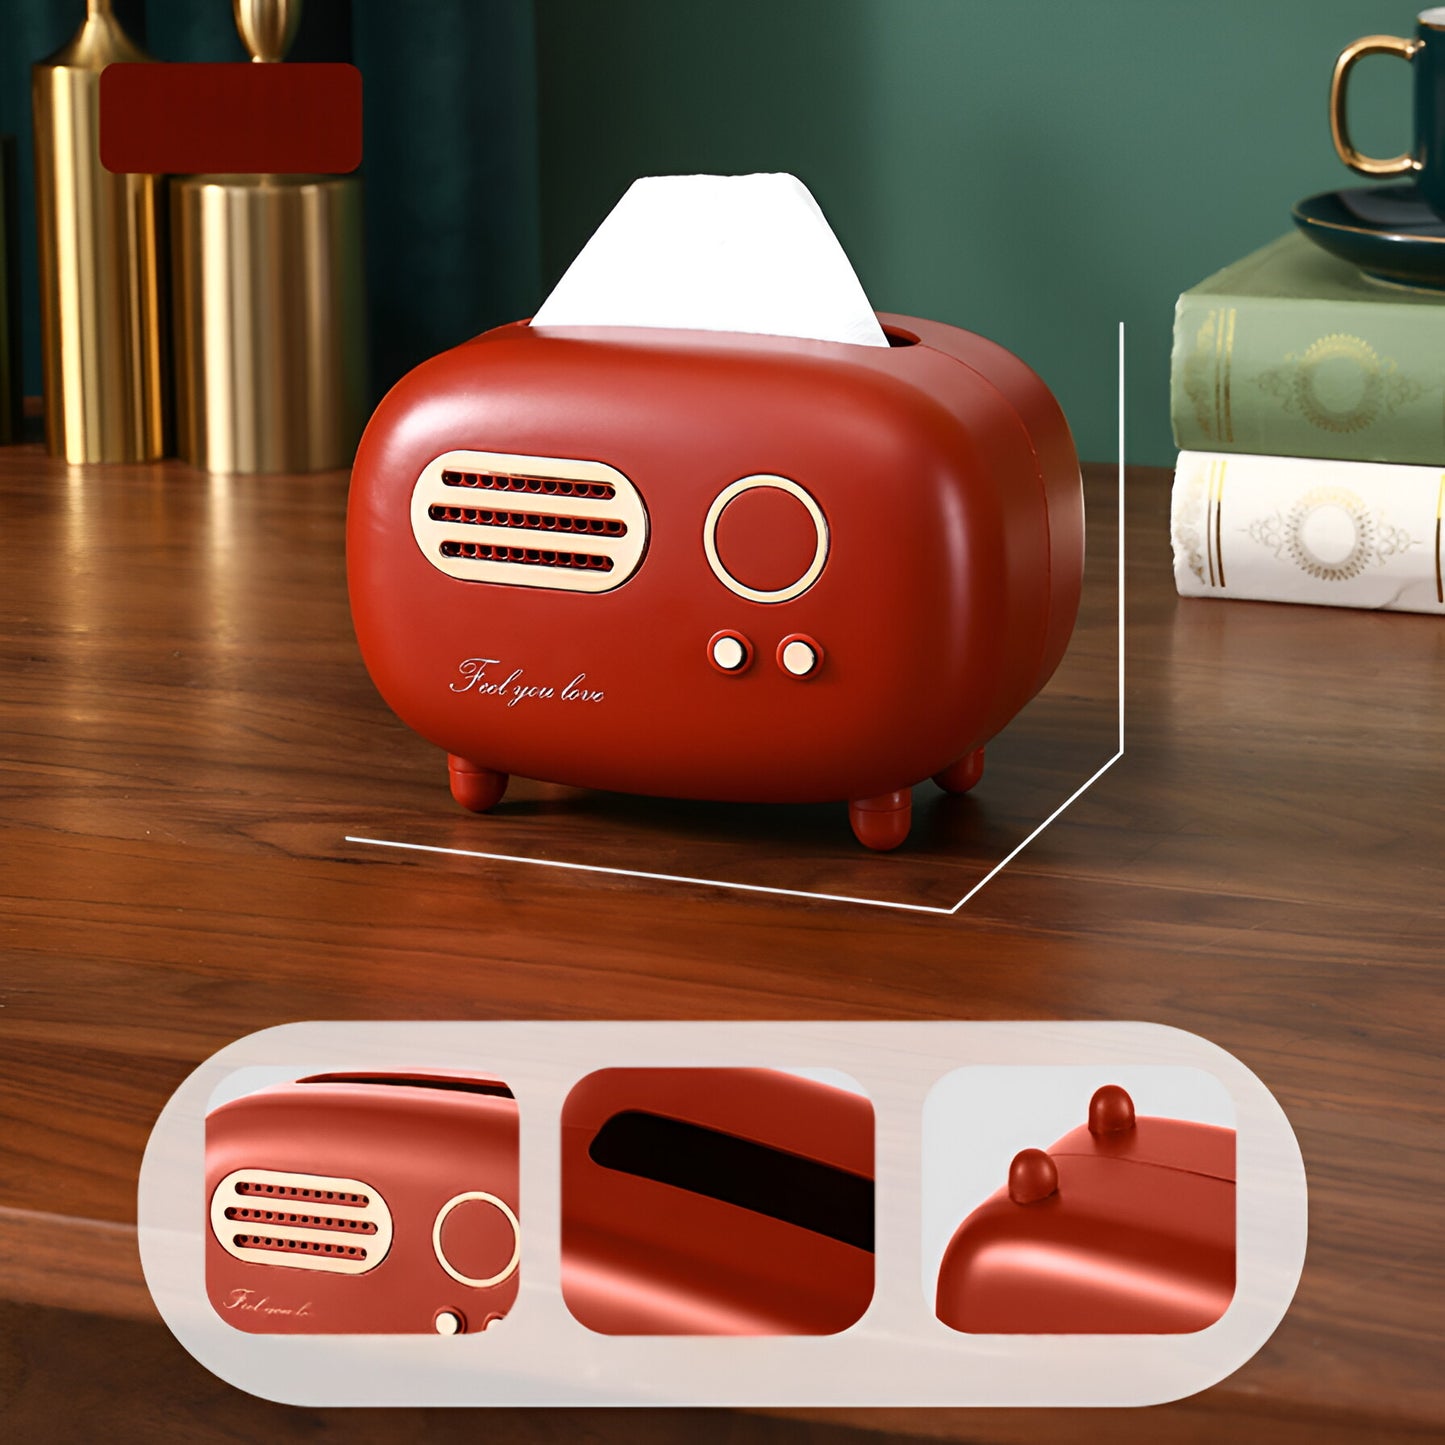 Vintage Radio Shaped Tissue Box Holder, Luxurious Living Room Dining Table Napkin Holder, Remote Control Coffee Table Organizer, Ideal for Kitchen Bathroom Bedroom Home Decor, Available in 3 Colors and Various Sizes